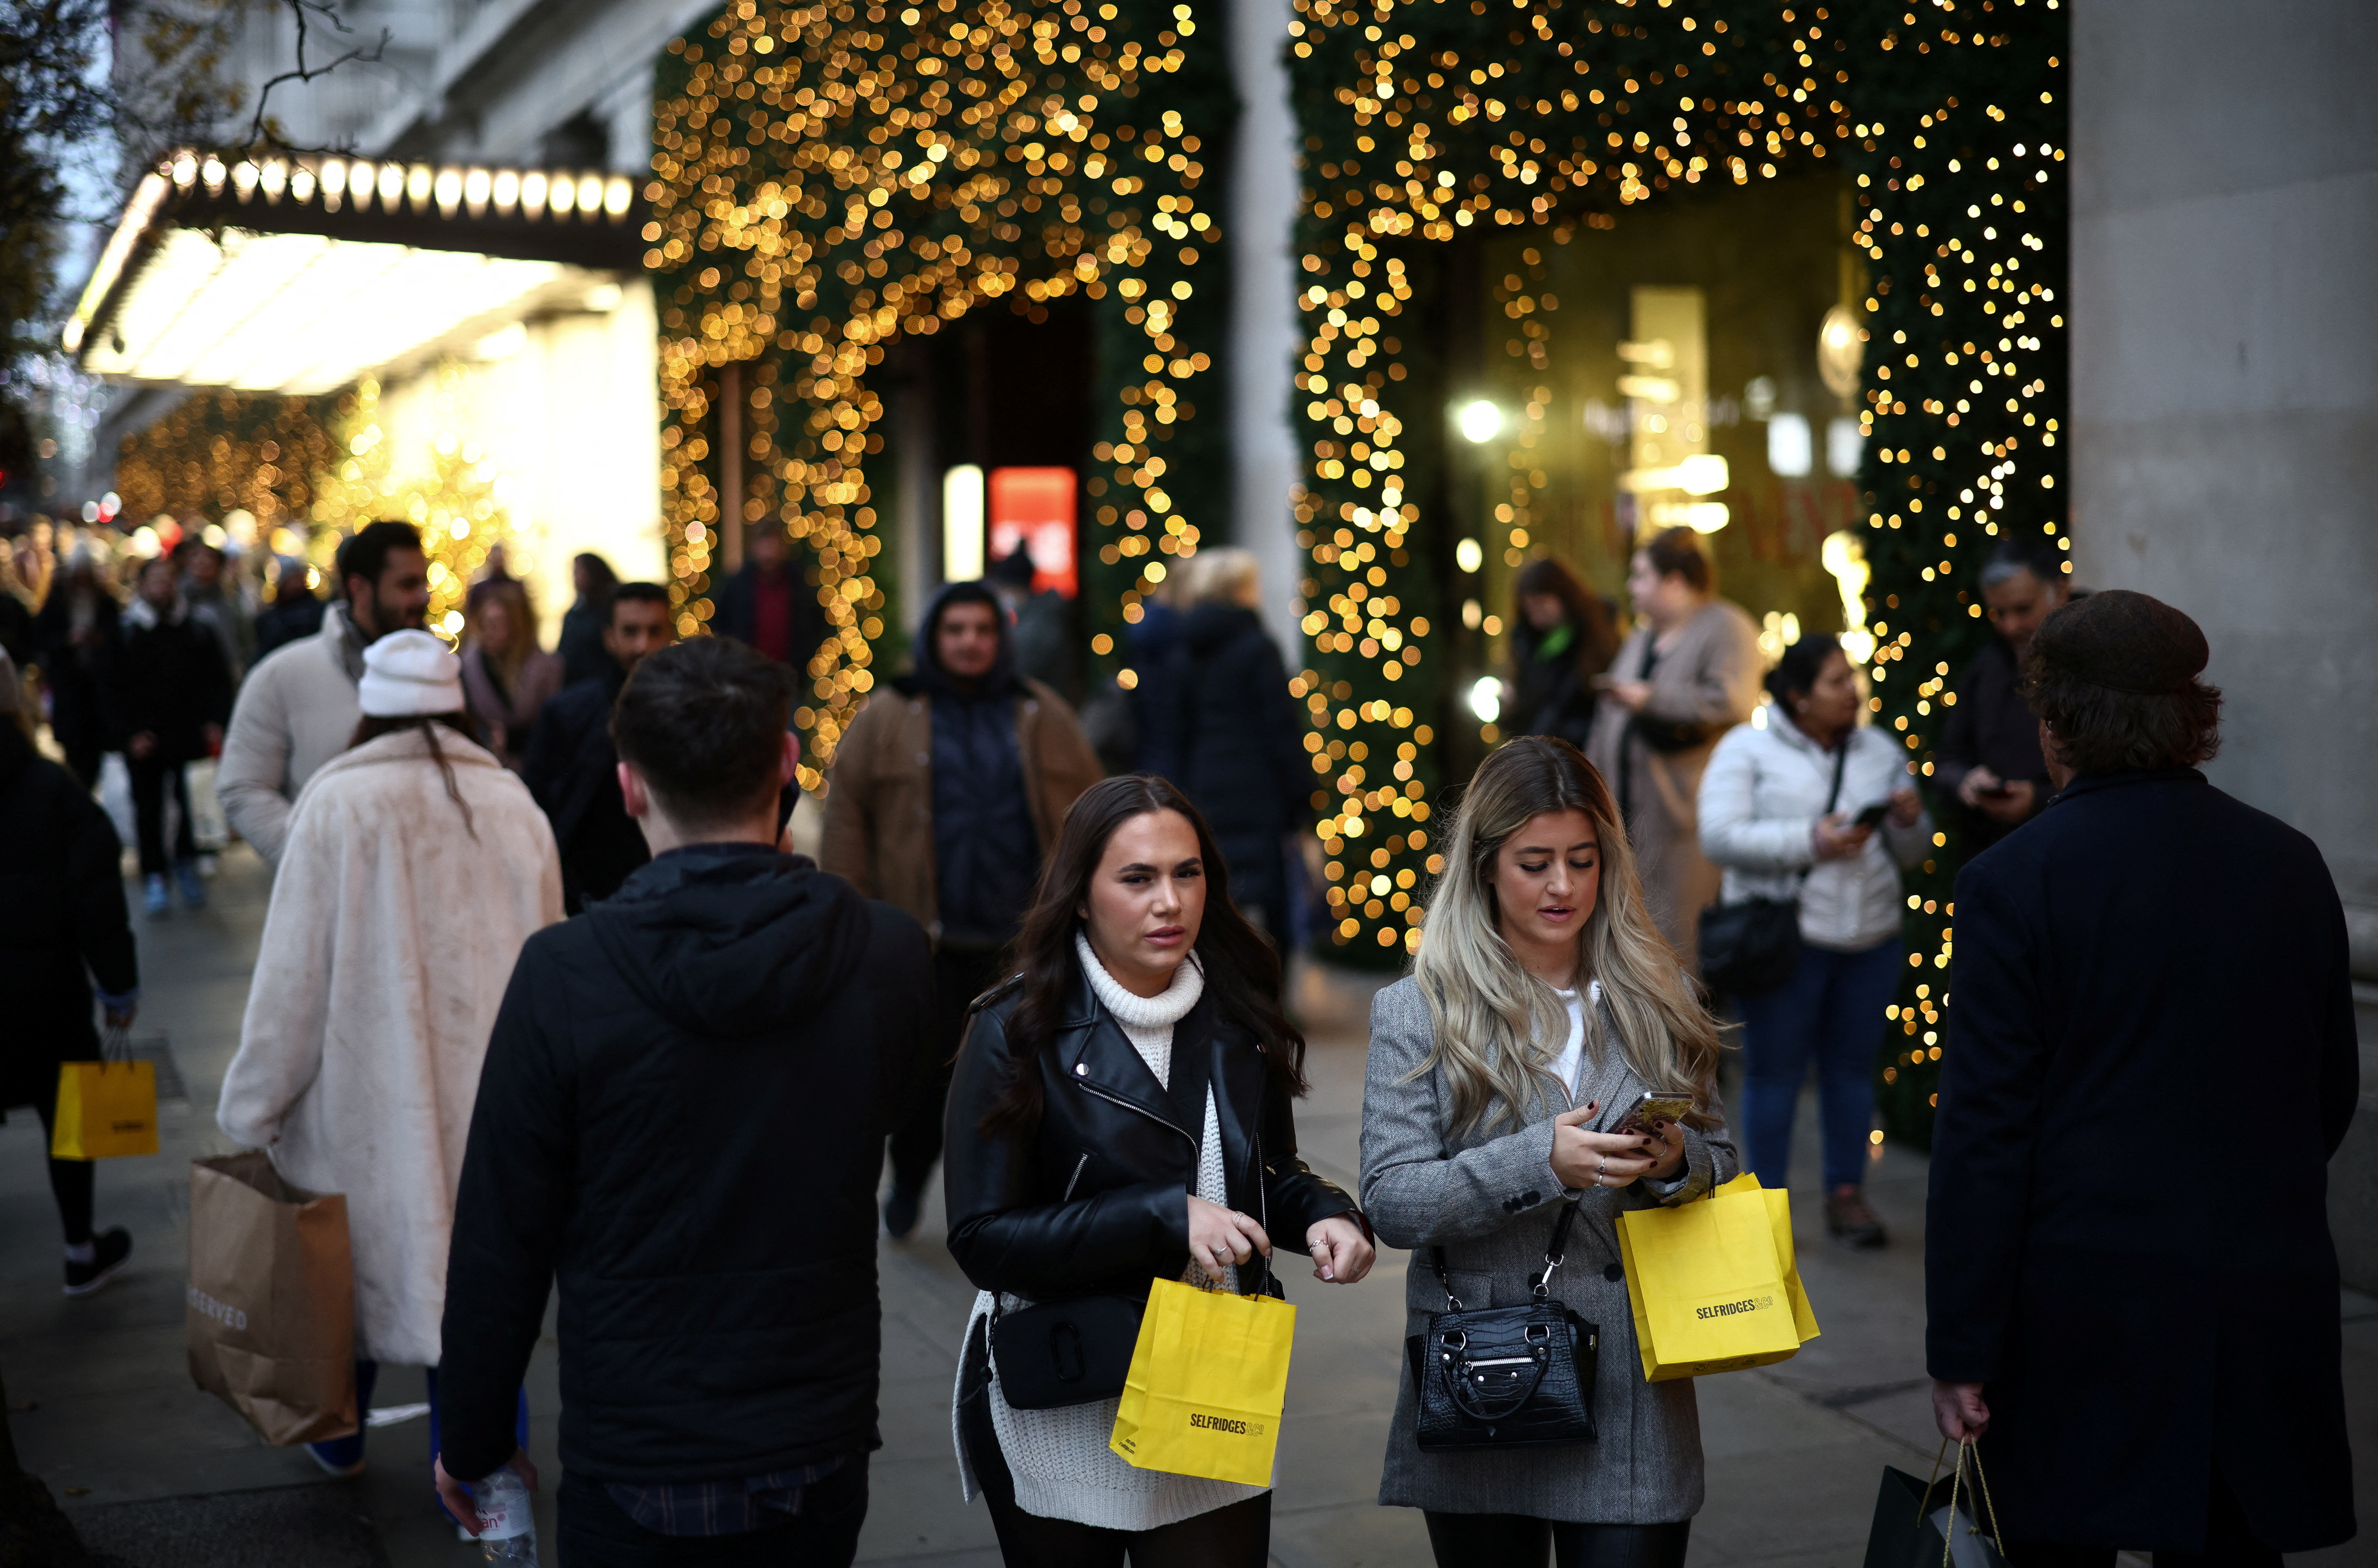 People carry shopping bags as they walk past Christmas themed shop displays on Oxford Street in London, December 4, 2022. REUTERS/Henry Nicholls